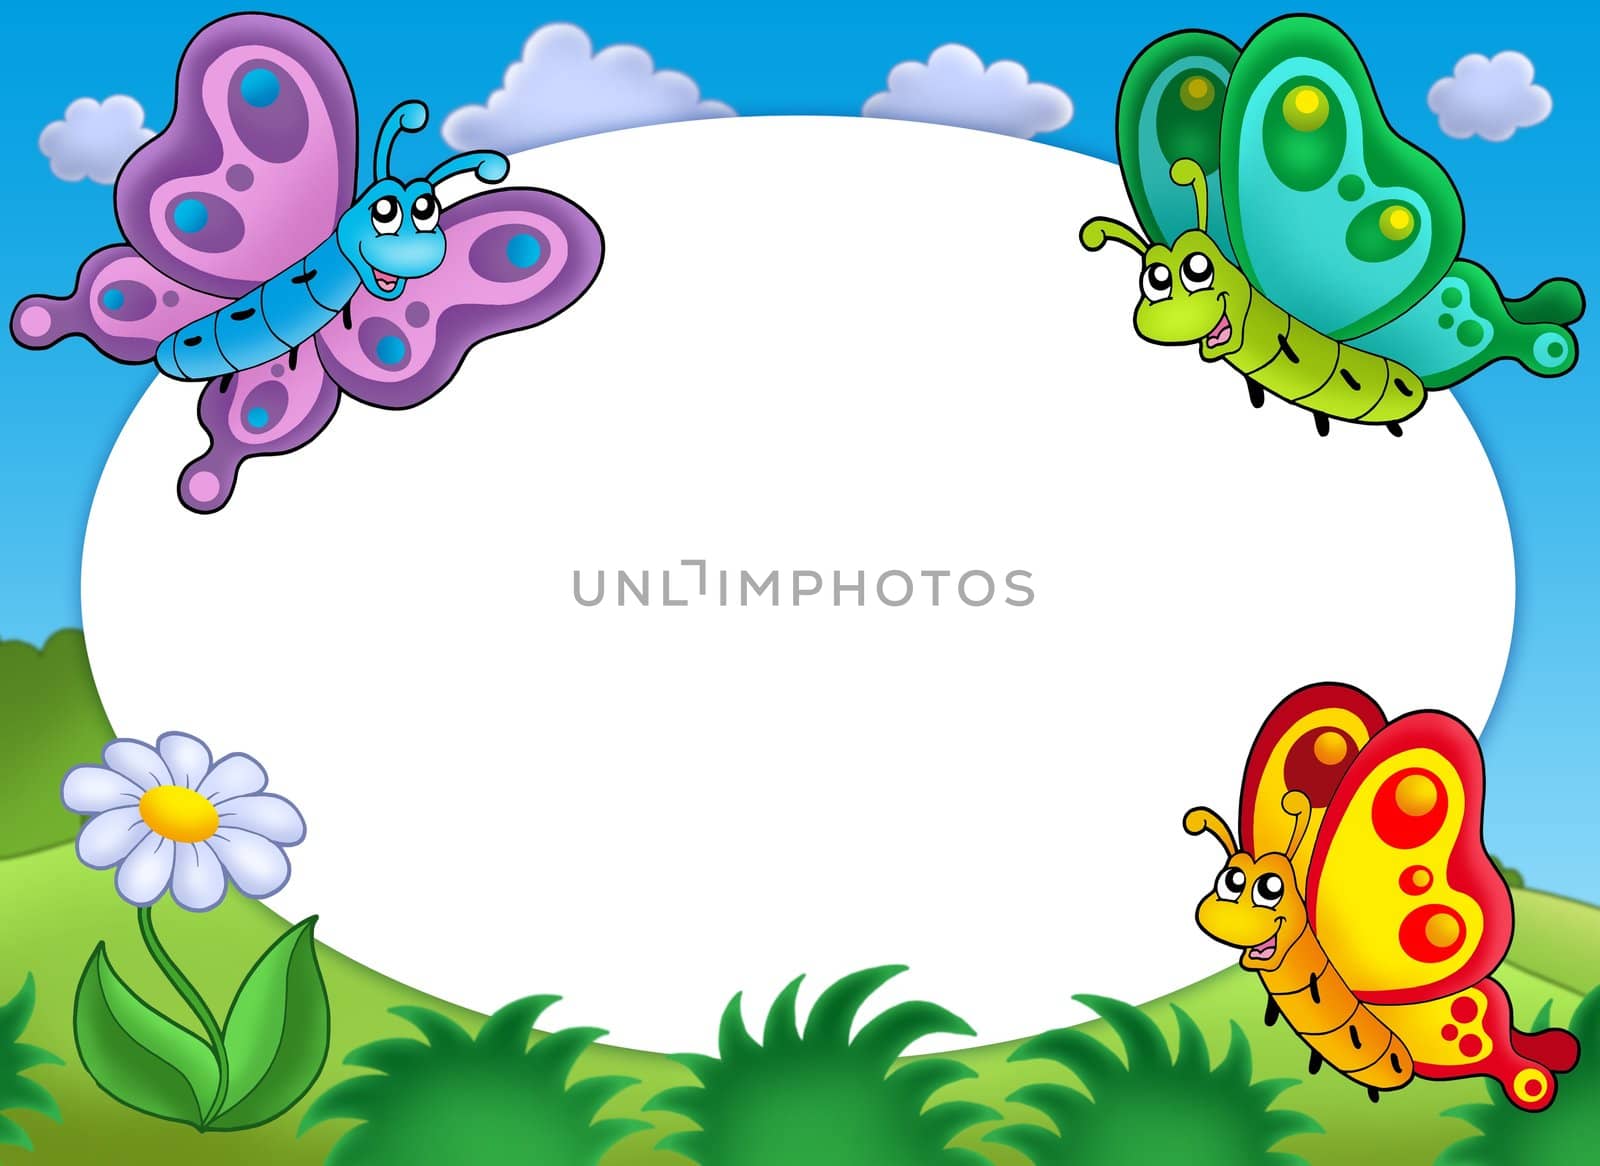 Round frame with cute butterflies - color illustration.